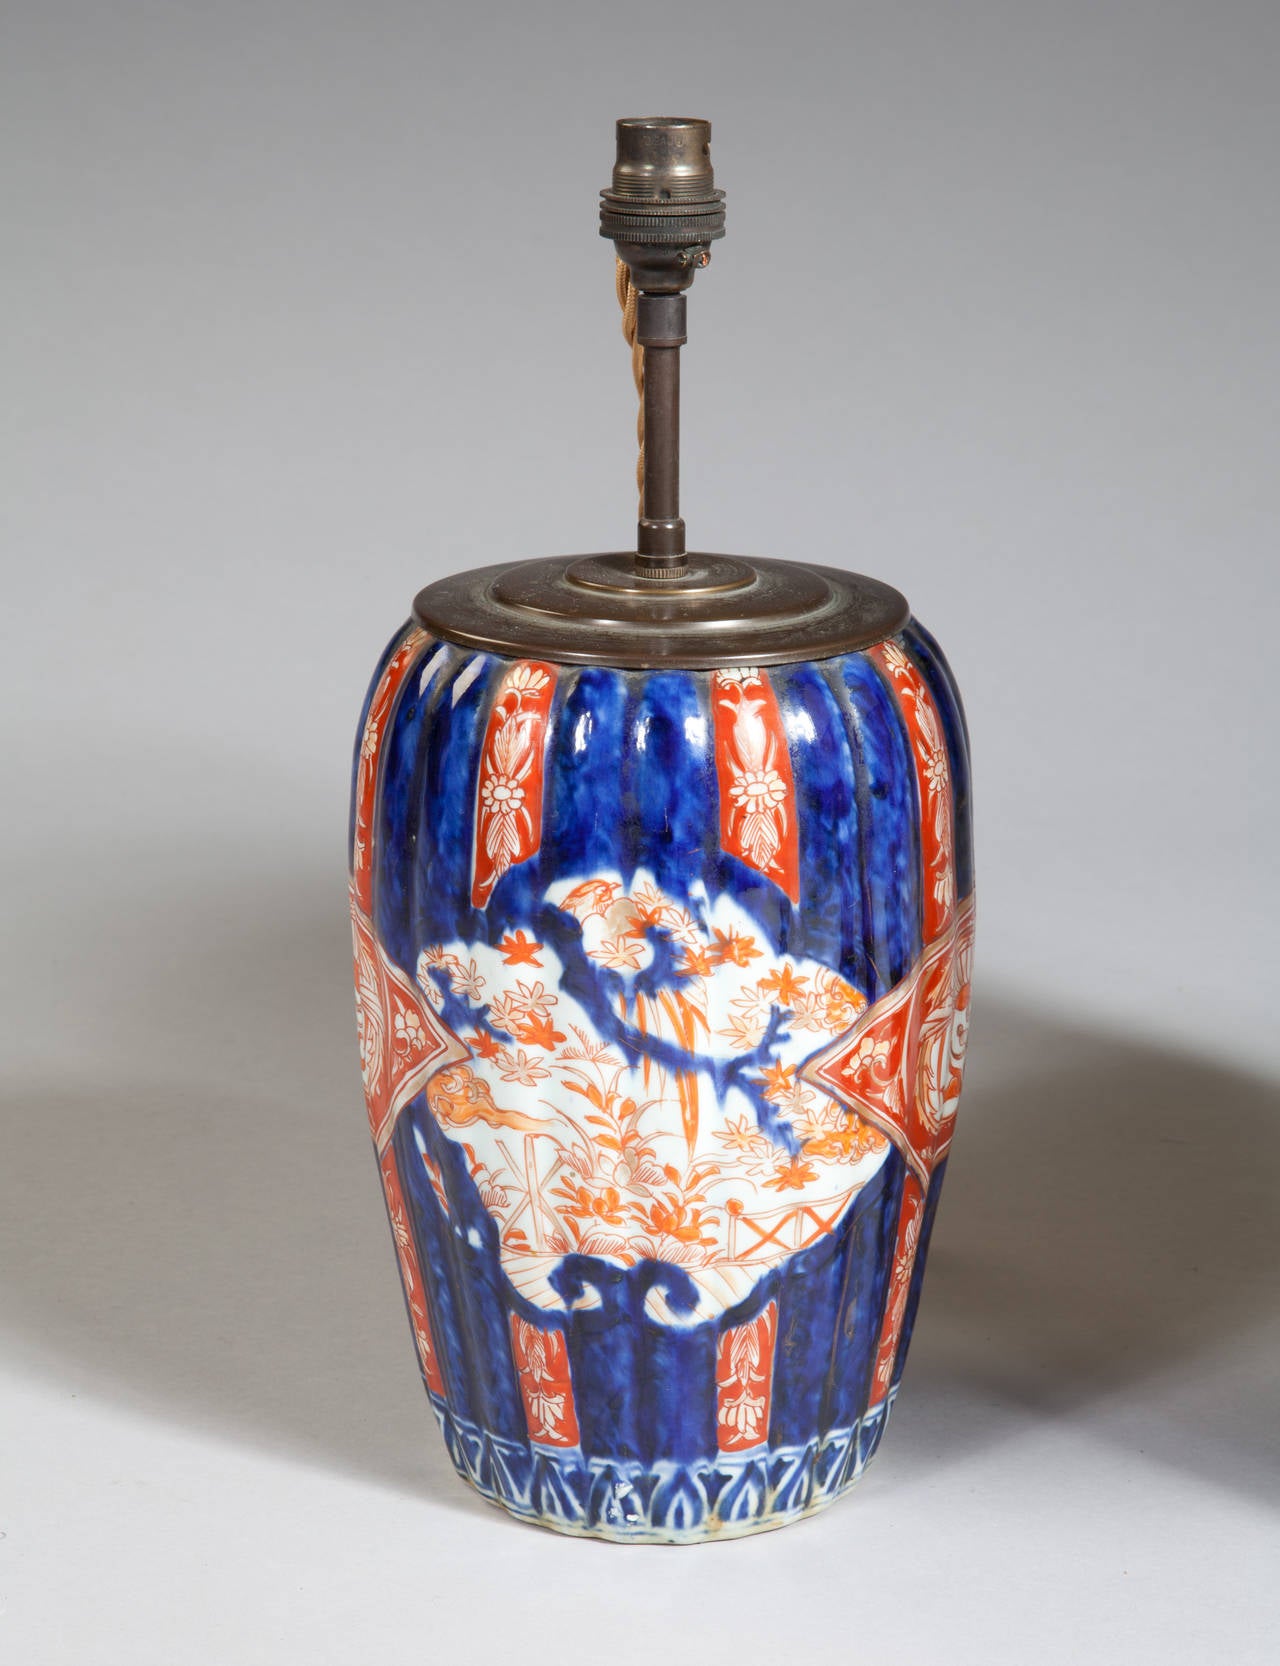 A fine pair of late 19th century Japanese Imari vases now mounted as lamps. The bulbous bodies decorated in coral orange, blue and white are slightly ribbed and taper towards the base. 

Offered with the white and black card shades shown.